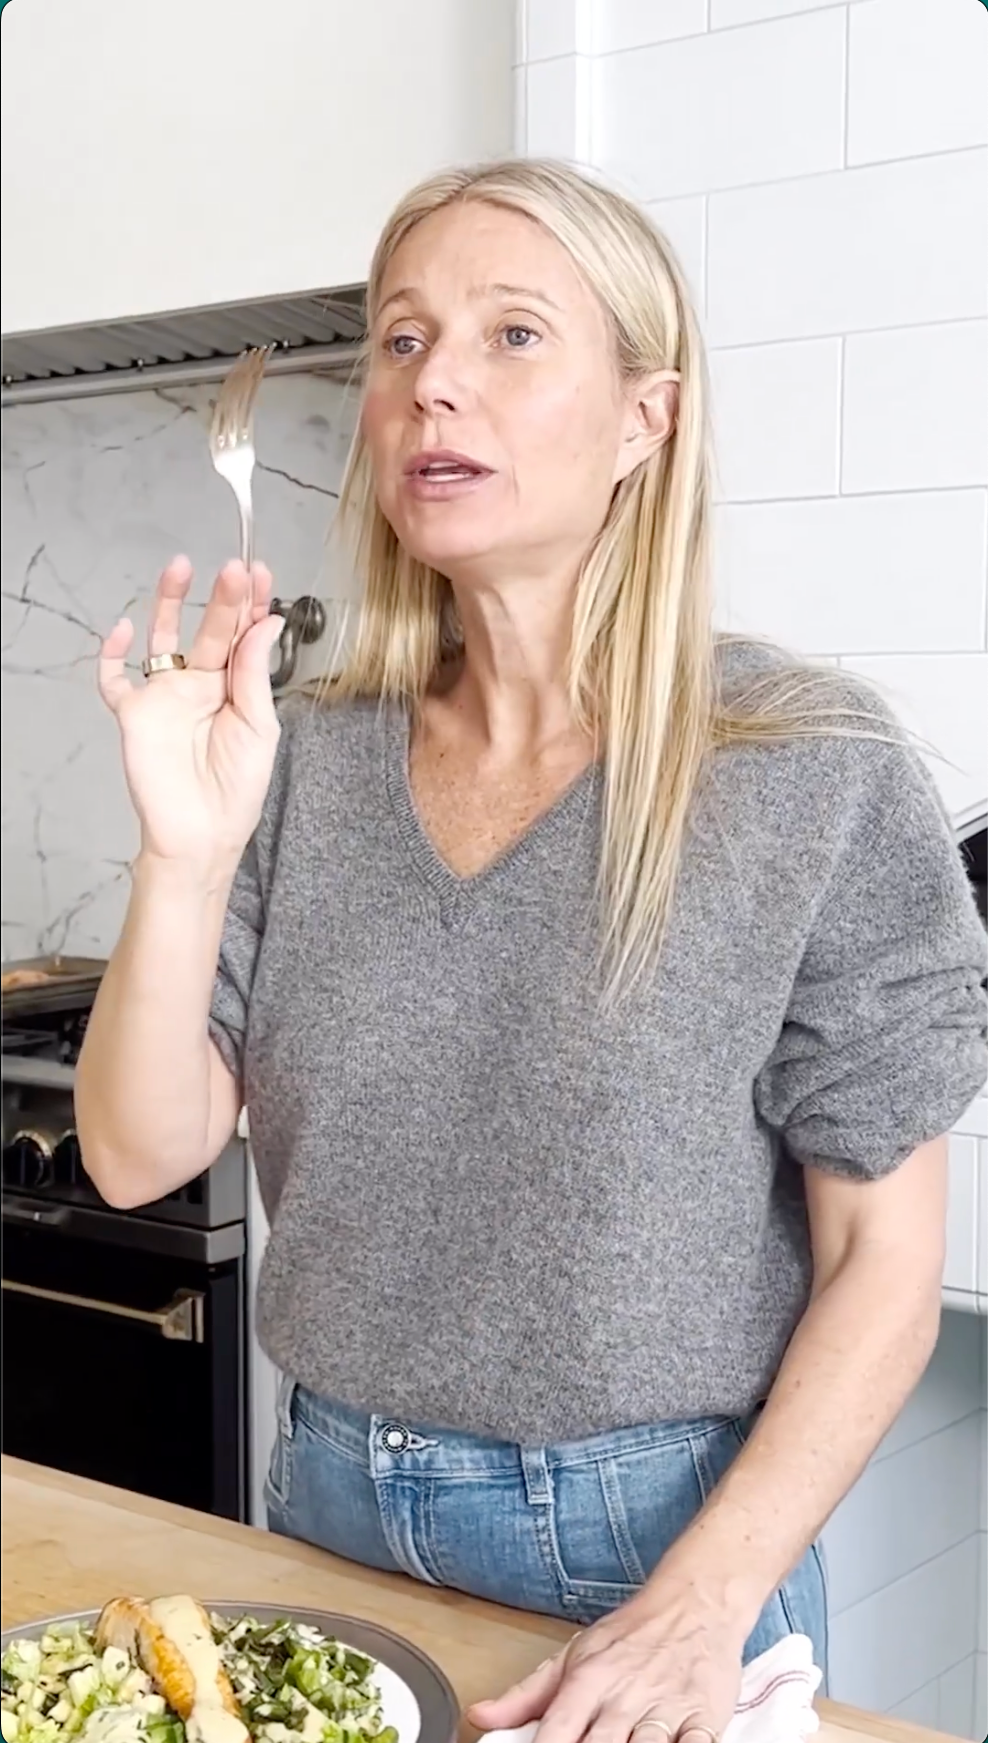 Gwyneth Paltrow Mocked For Adding 'Fat, Fat And Fat' To Her 'Detox' Salad